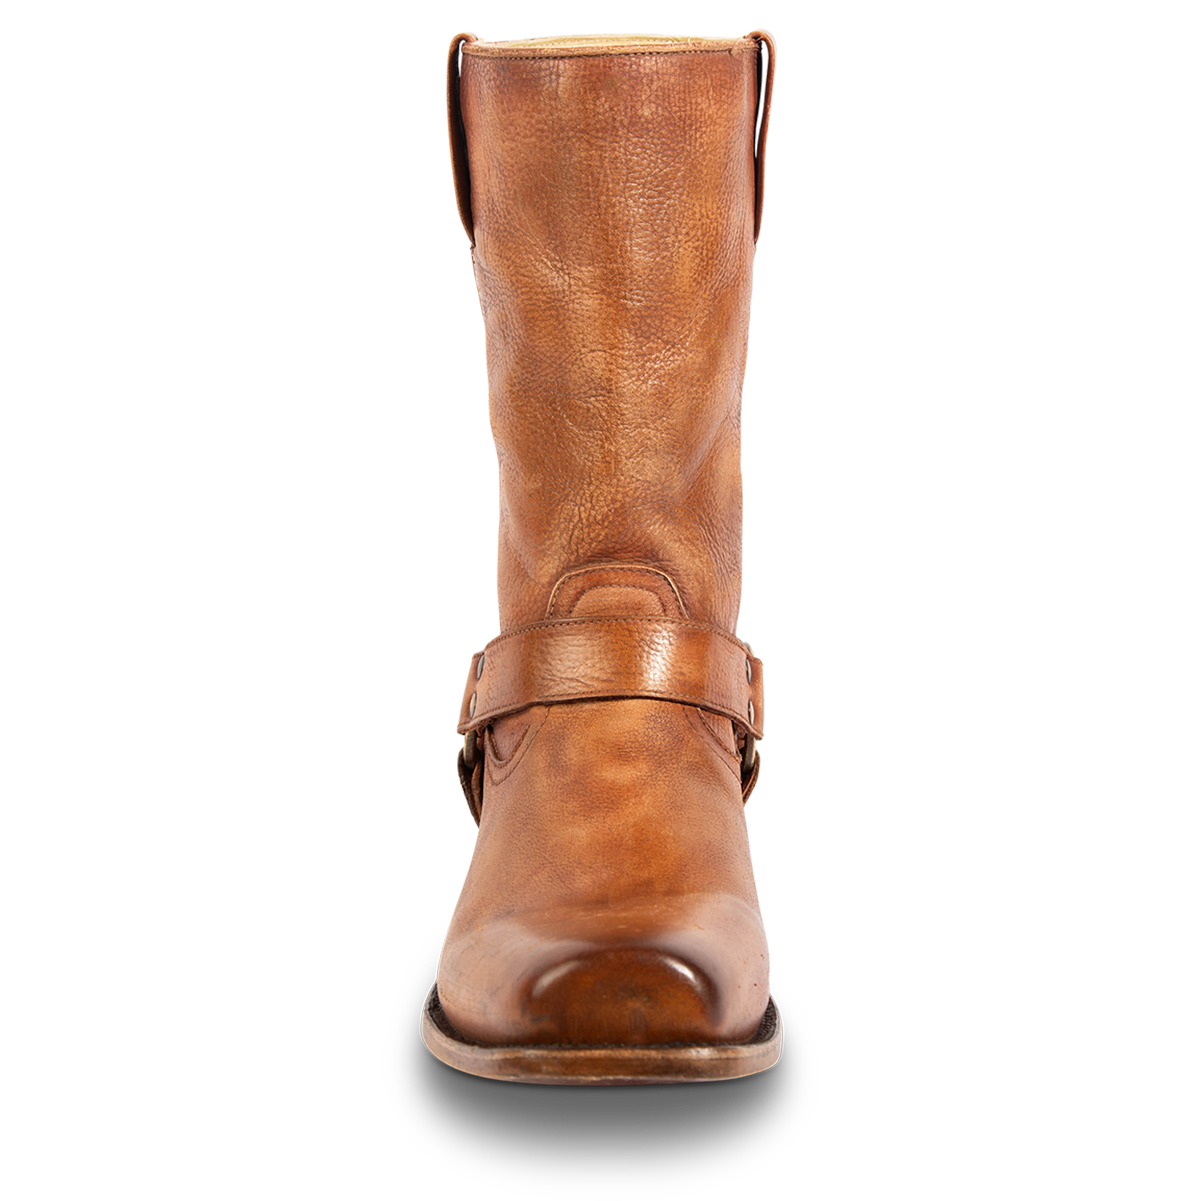 Front view showing distressed shaft and leather ankle harness on FREEBIRD men's Copperhead whiskey boot